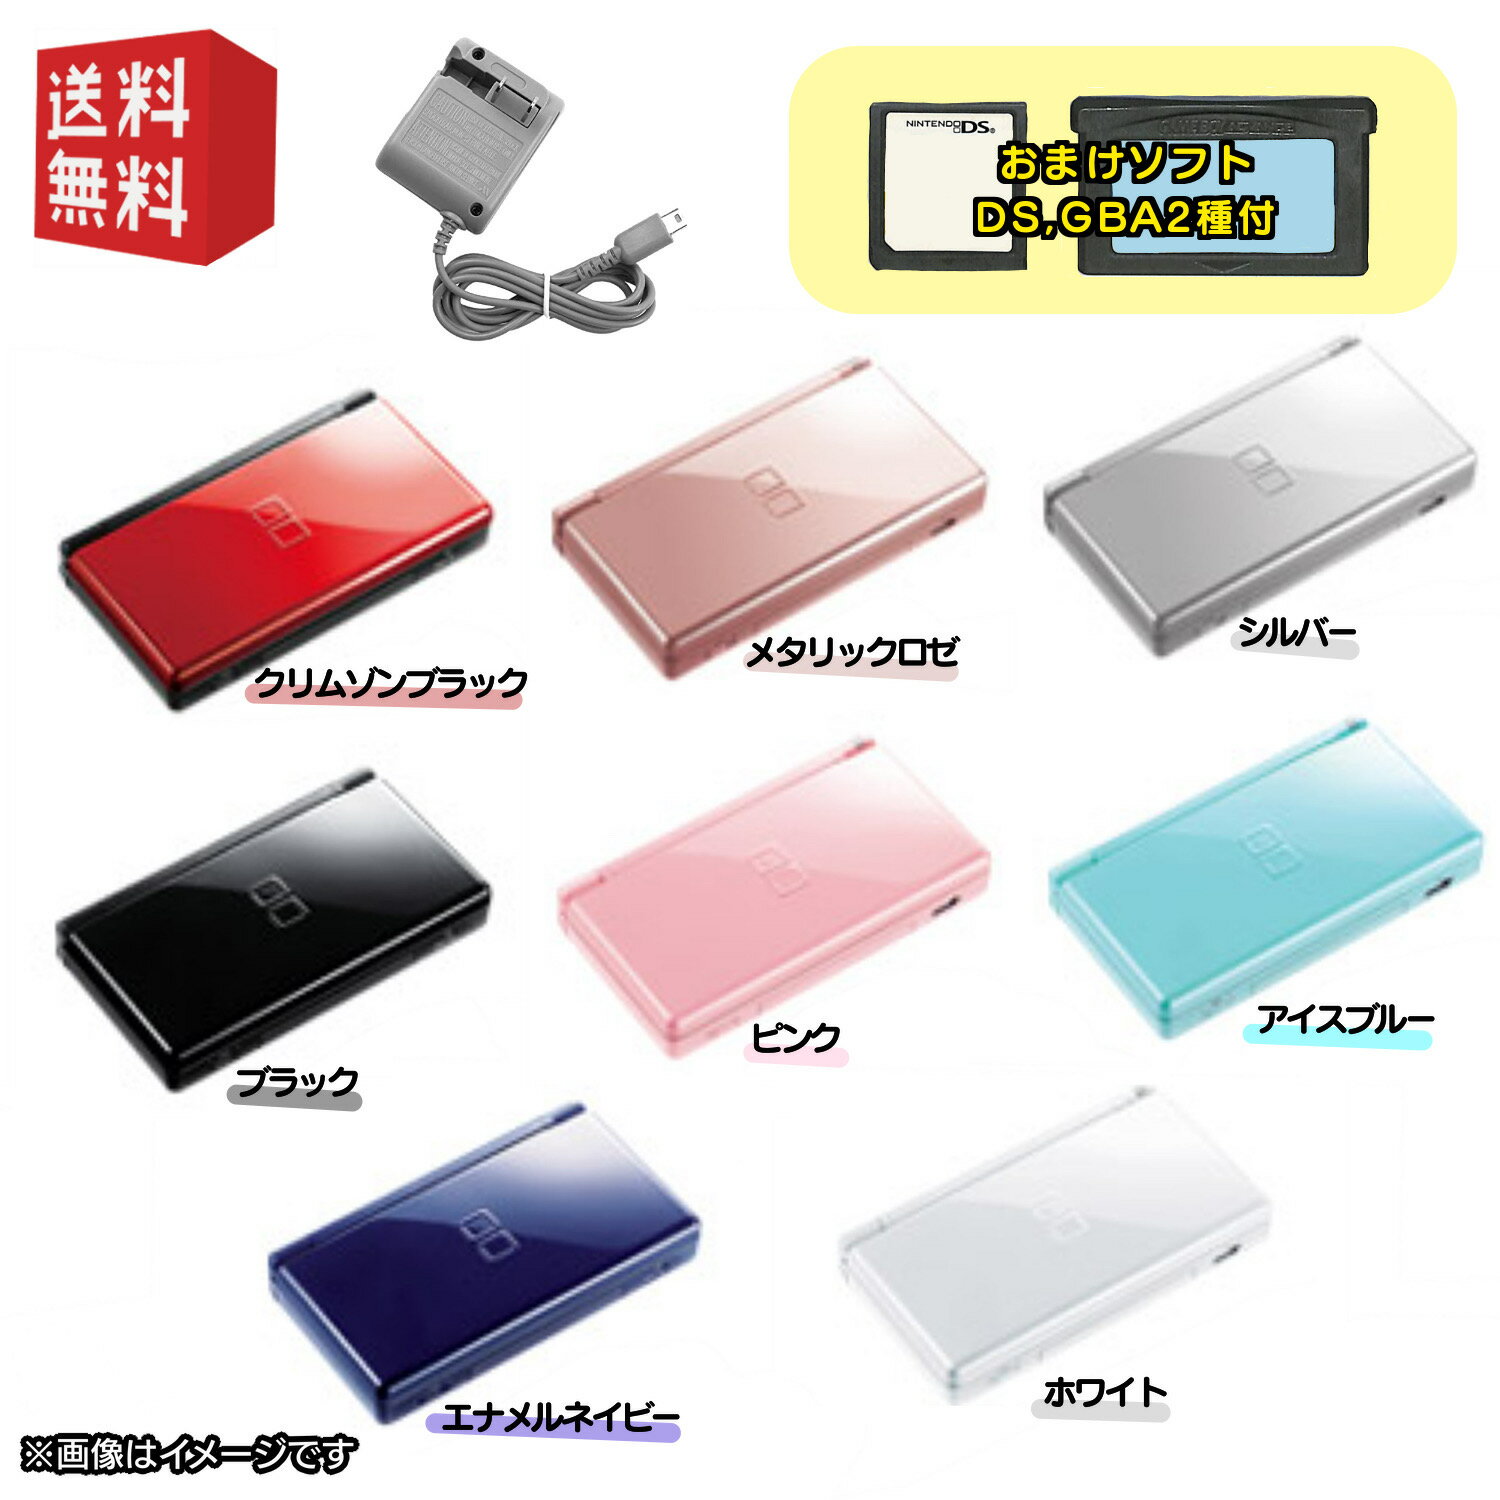 Nintendo DS Cg {  VׂZbg  IׂJ[8F A_v^[t   ܂   DS\tg{GBA\tg e1 t  Ly[Ώۏi@  DS{